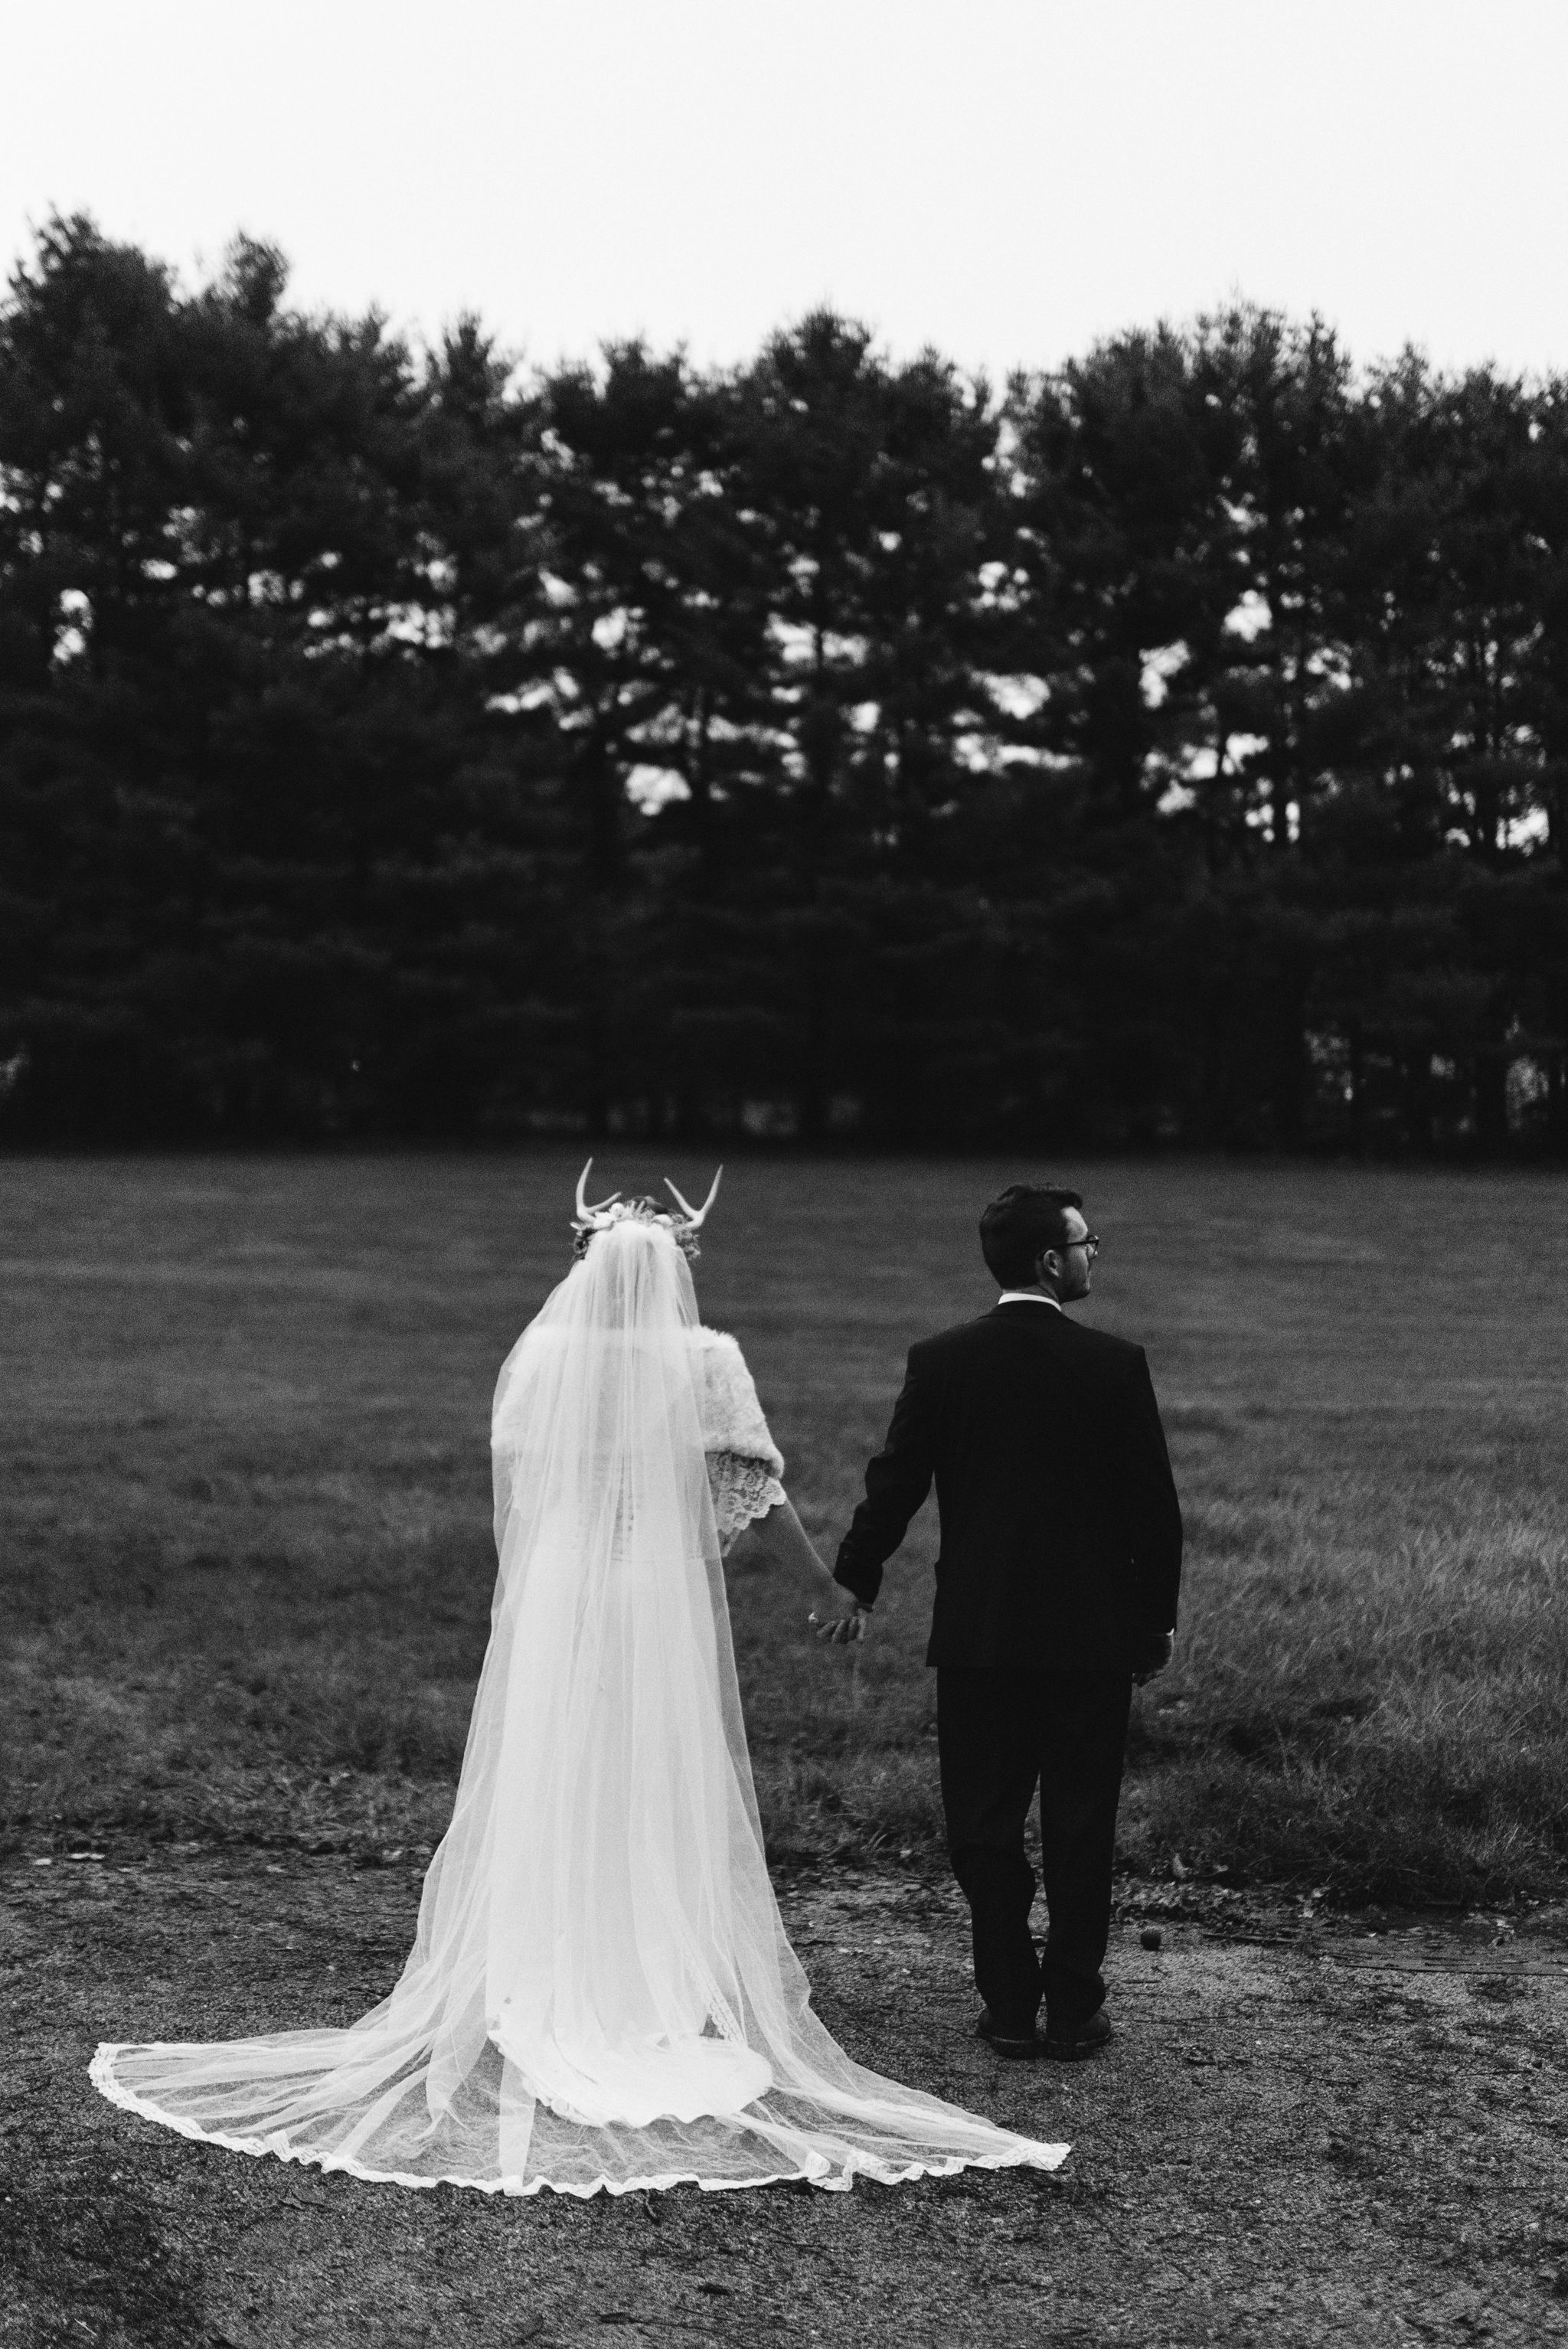  Maryland, Baltimore Wedding Photographer, Backyard Wedding, Fall, October, Dark Bohemian, Whimsical, Fun, Portrait of Bride and Groom from Behind, Black and White Photo 